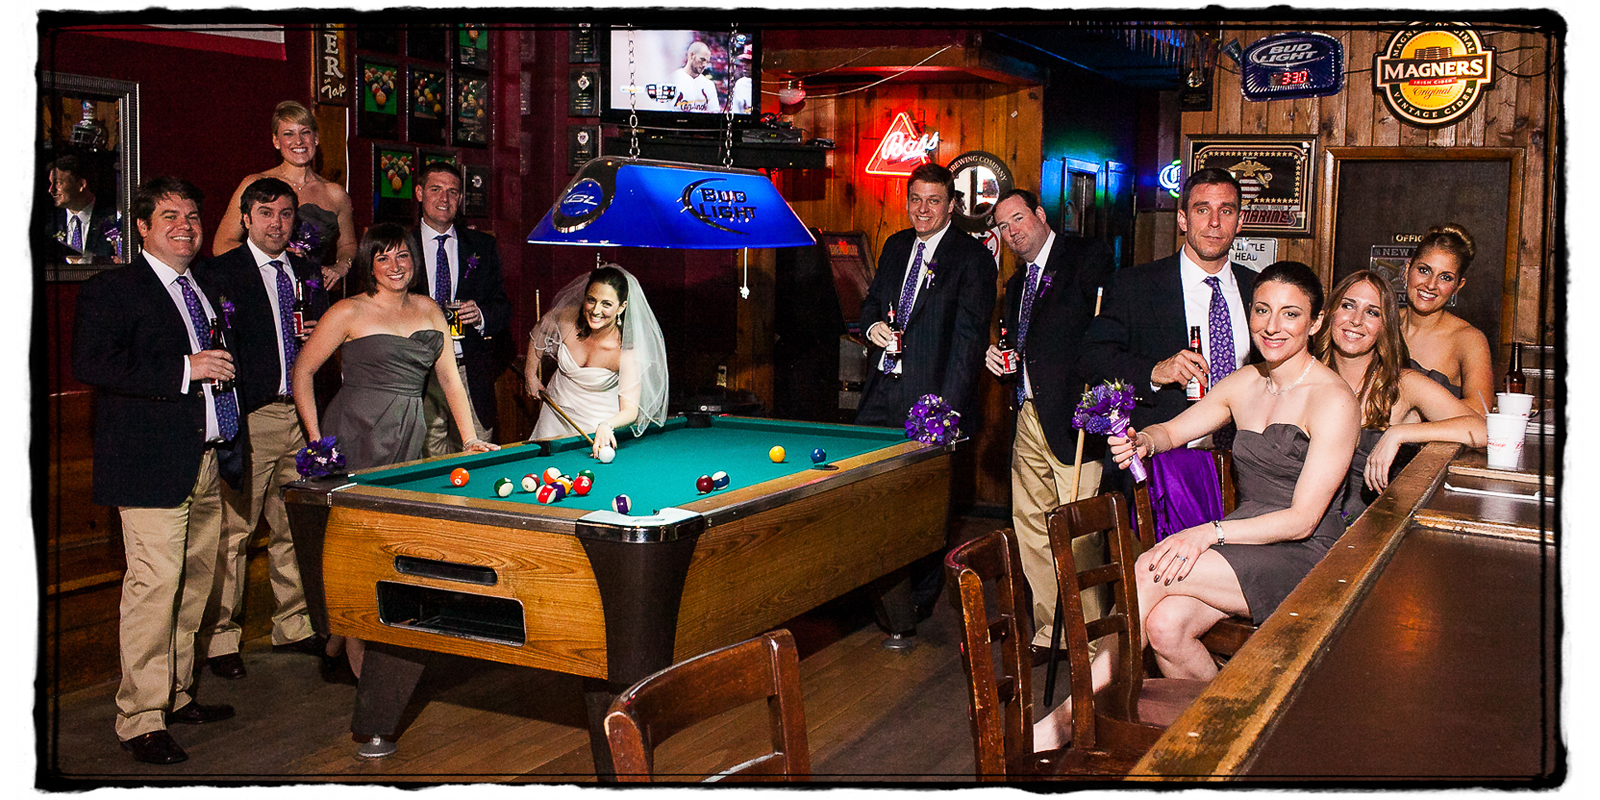 Allison & Peter wanted a shot with their bridal party in their favorite local watering hole in the West Village, NYC.